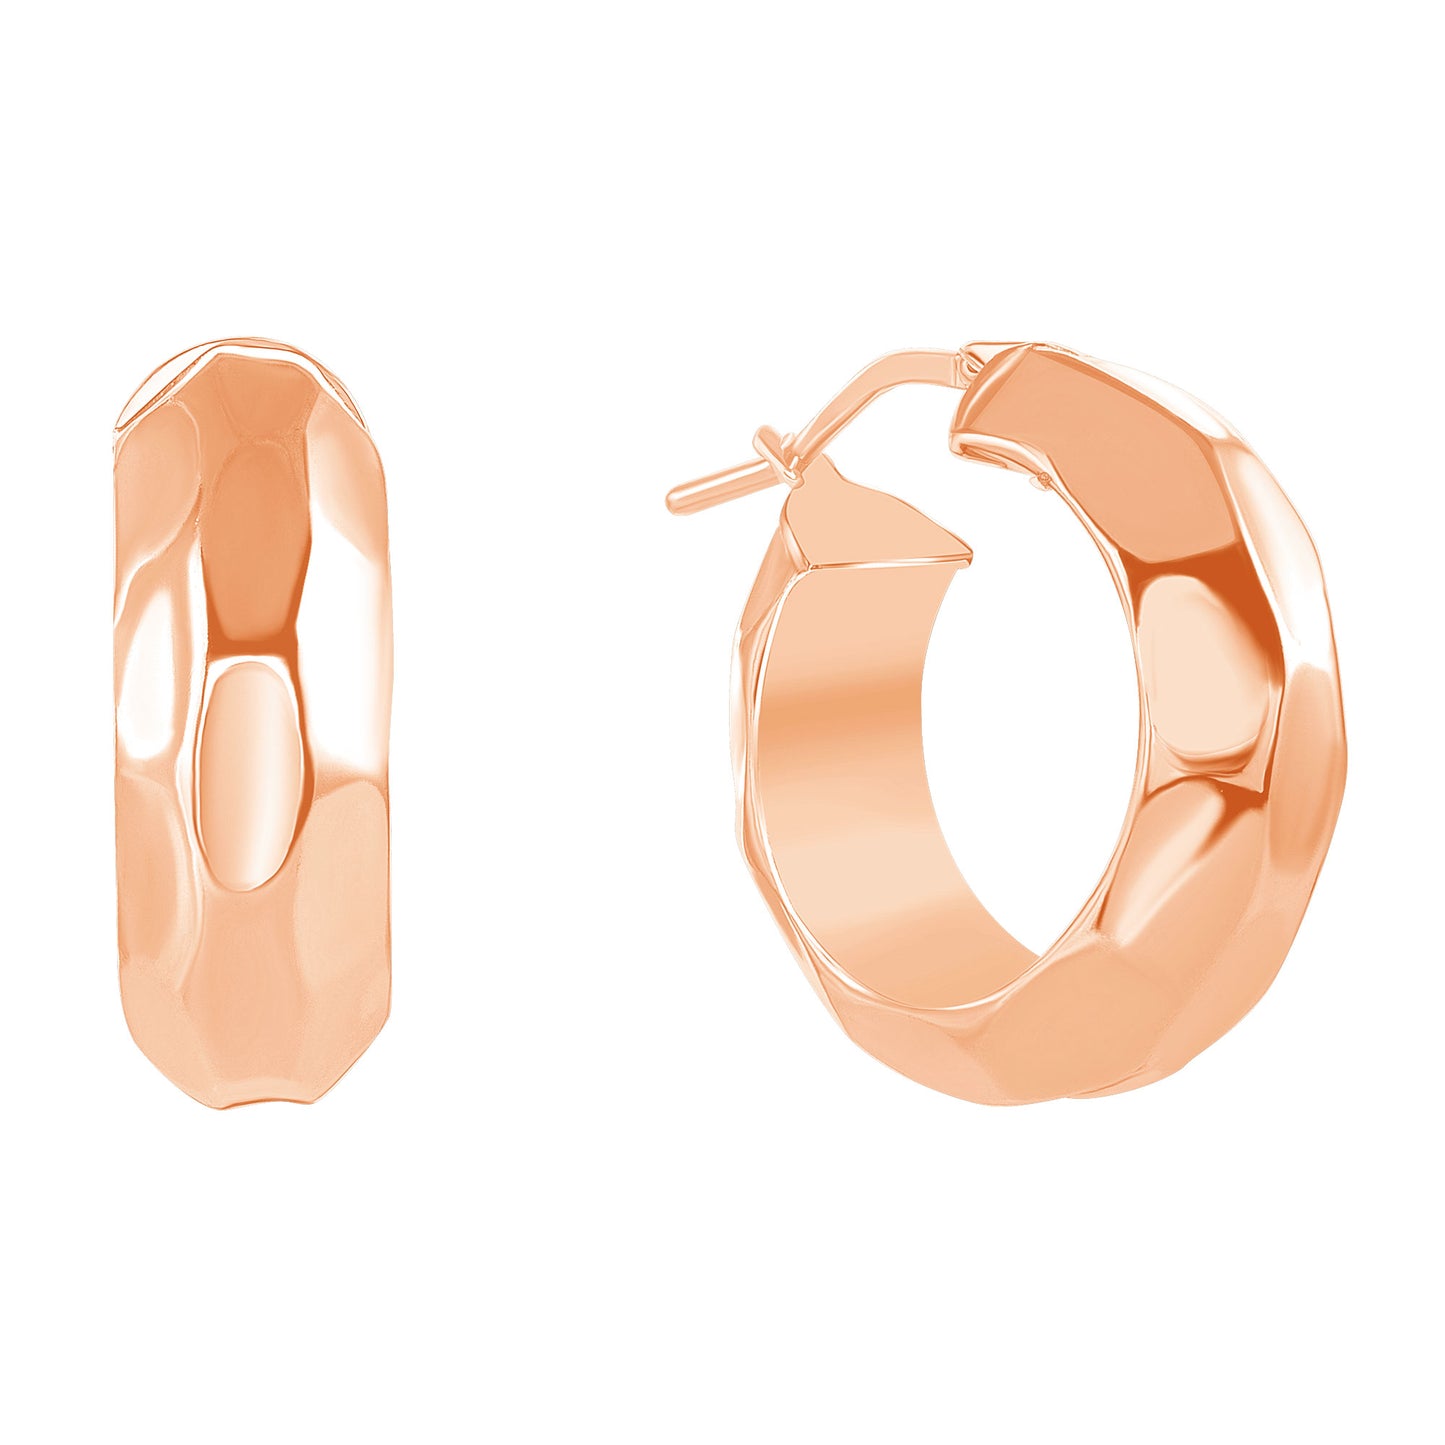 Silver 925 Italian 15 mm. Rose Gold Plated Cubic Plain Hoop Earring. ITHP140-15MRG